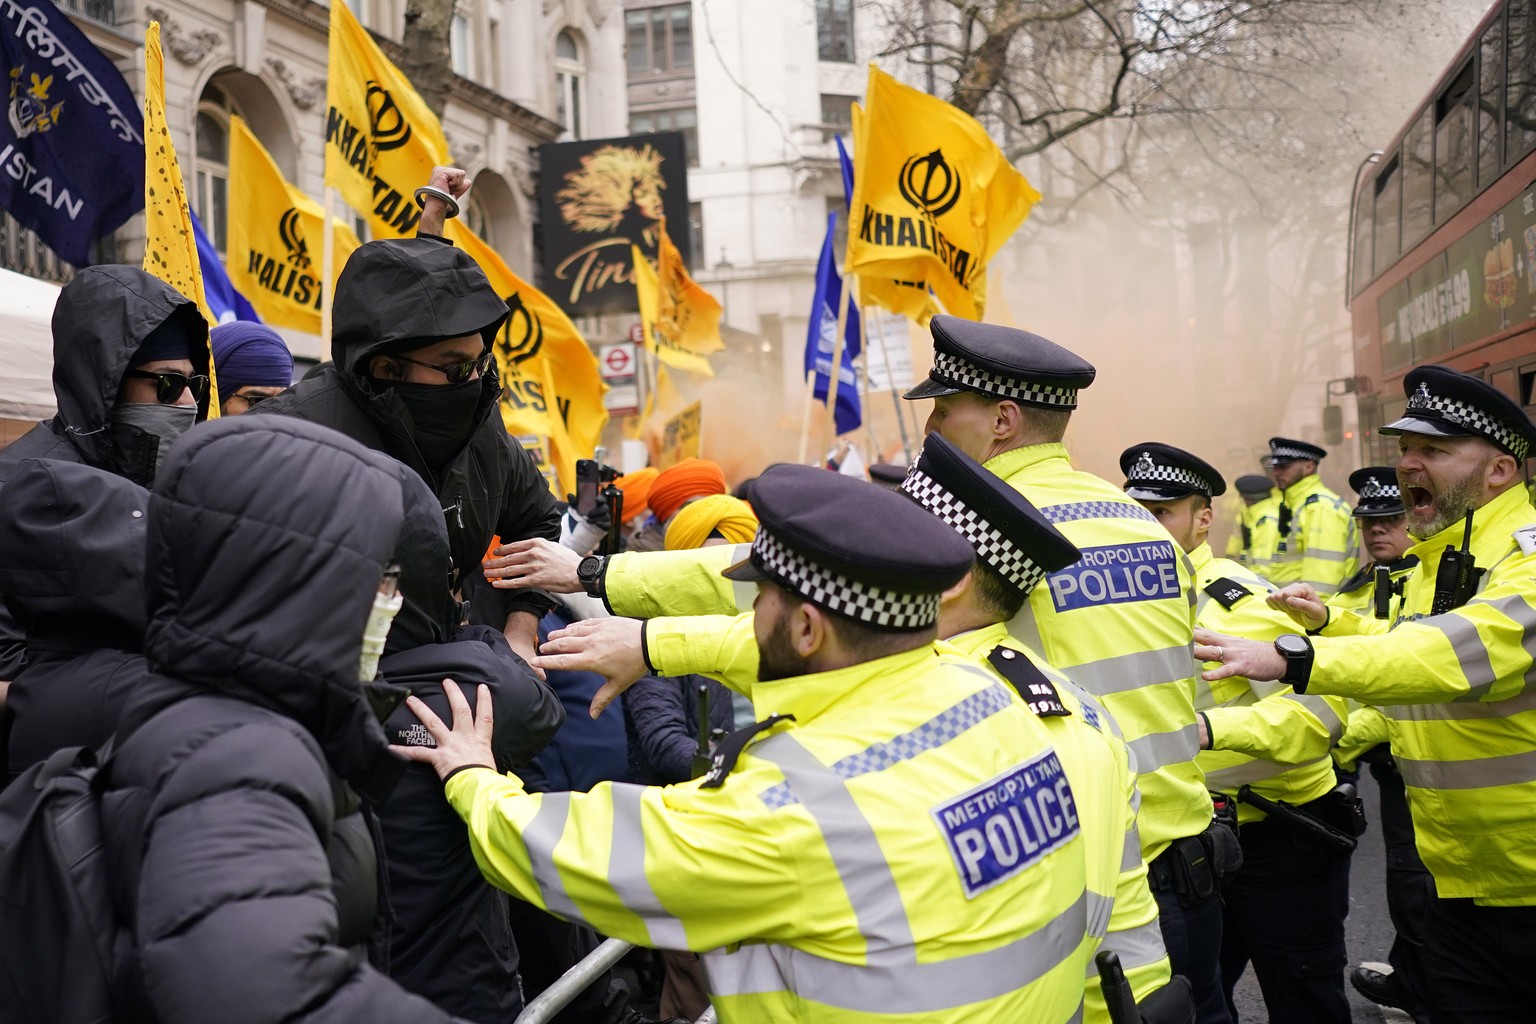 Police officers push back protestors of the Khalistan movement during a demonstration outside of the Indian High Commission in London, Wednesday, March 22, 2023.(AP Photo/Alberto Pezzali)